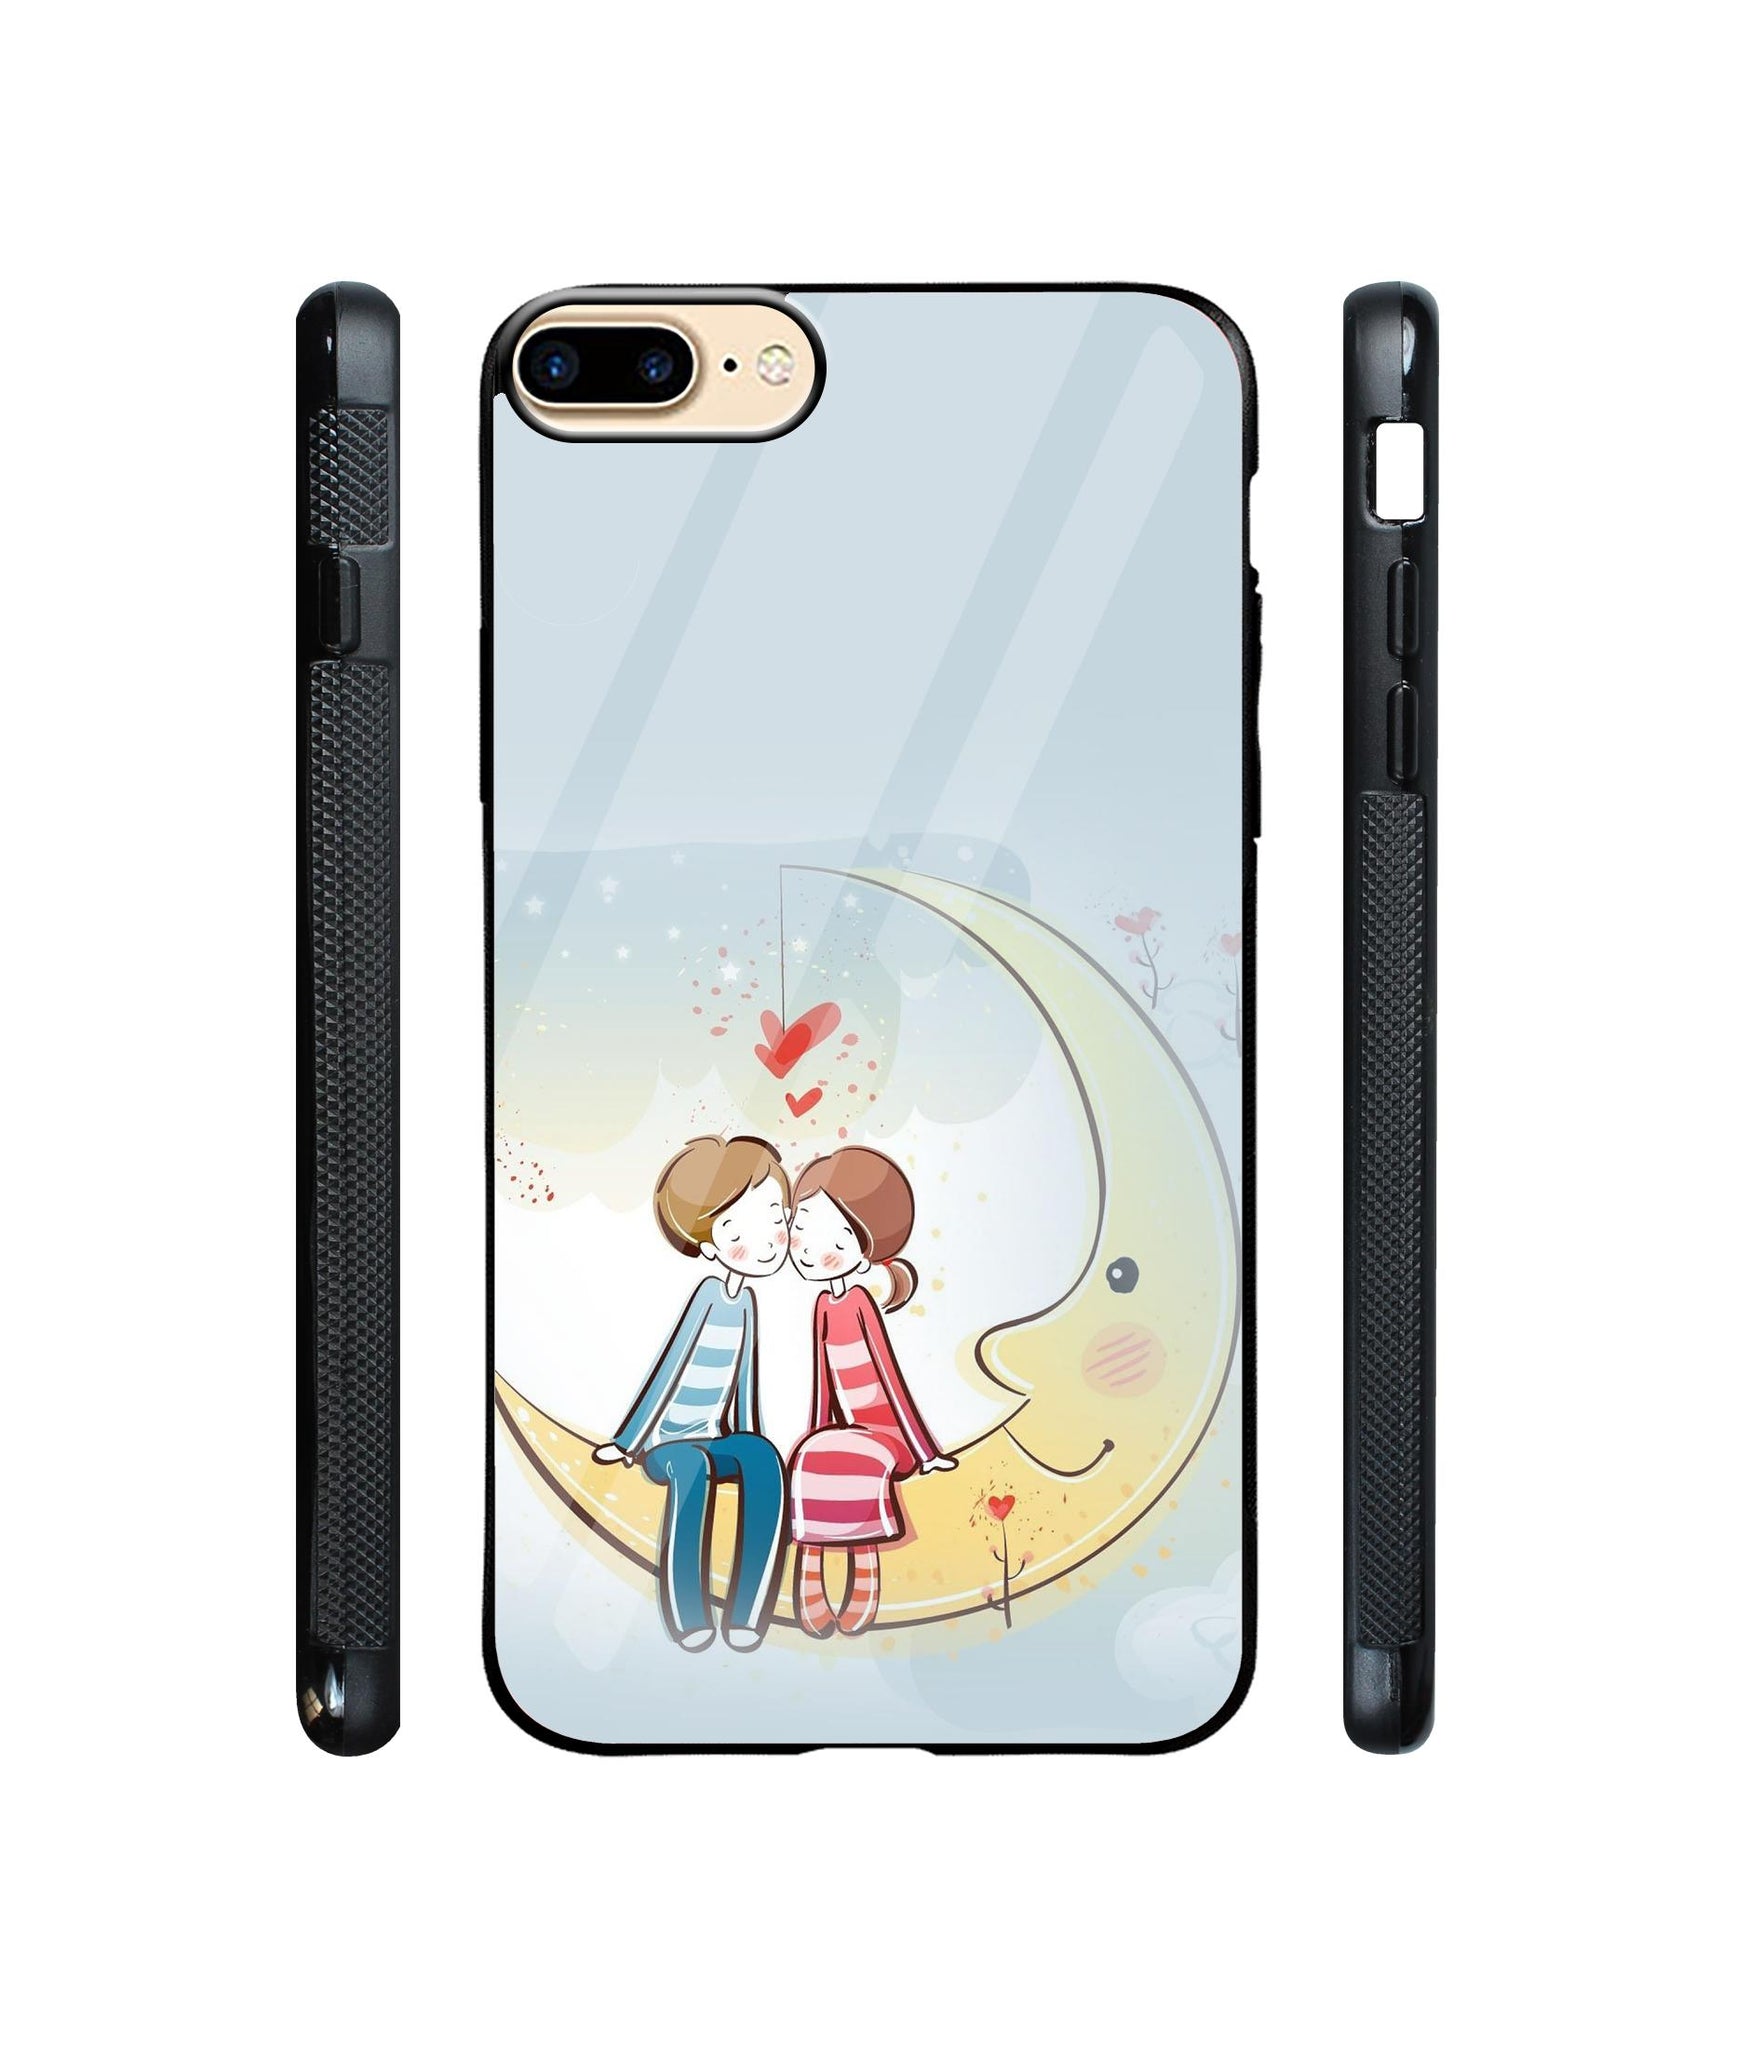 Couple Sitting On Moon Designer Printed Glass Cover for Apple iPhone 7 Plus / iPhone 8 Plus